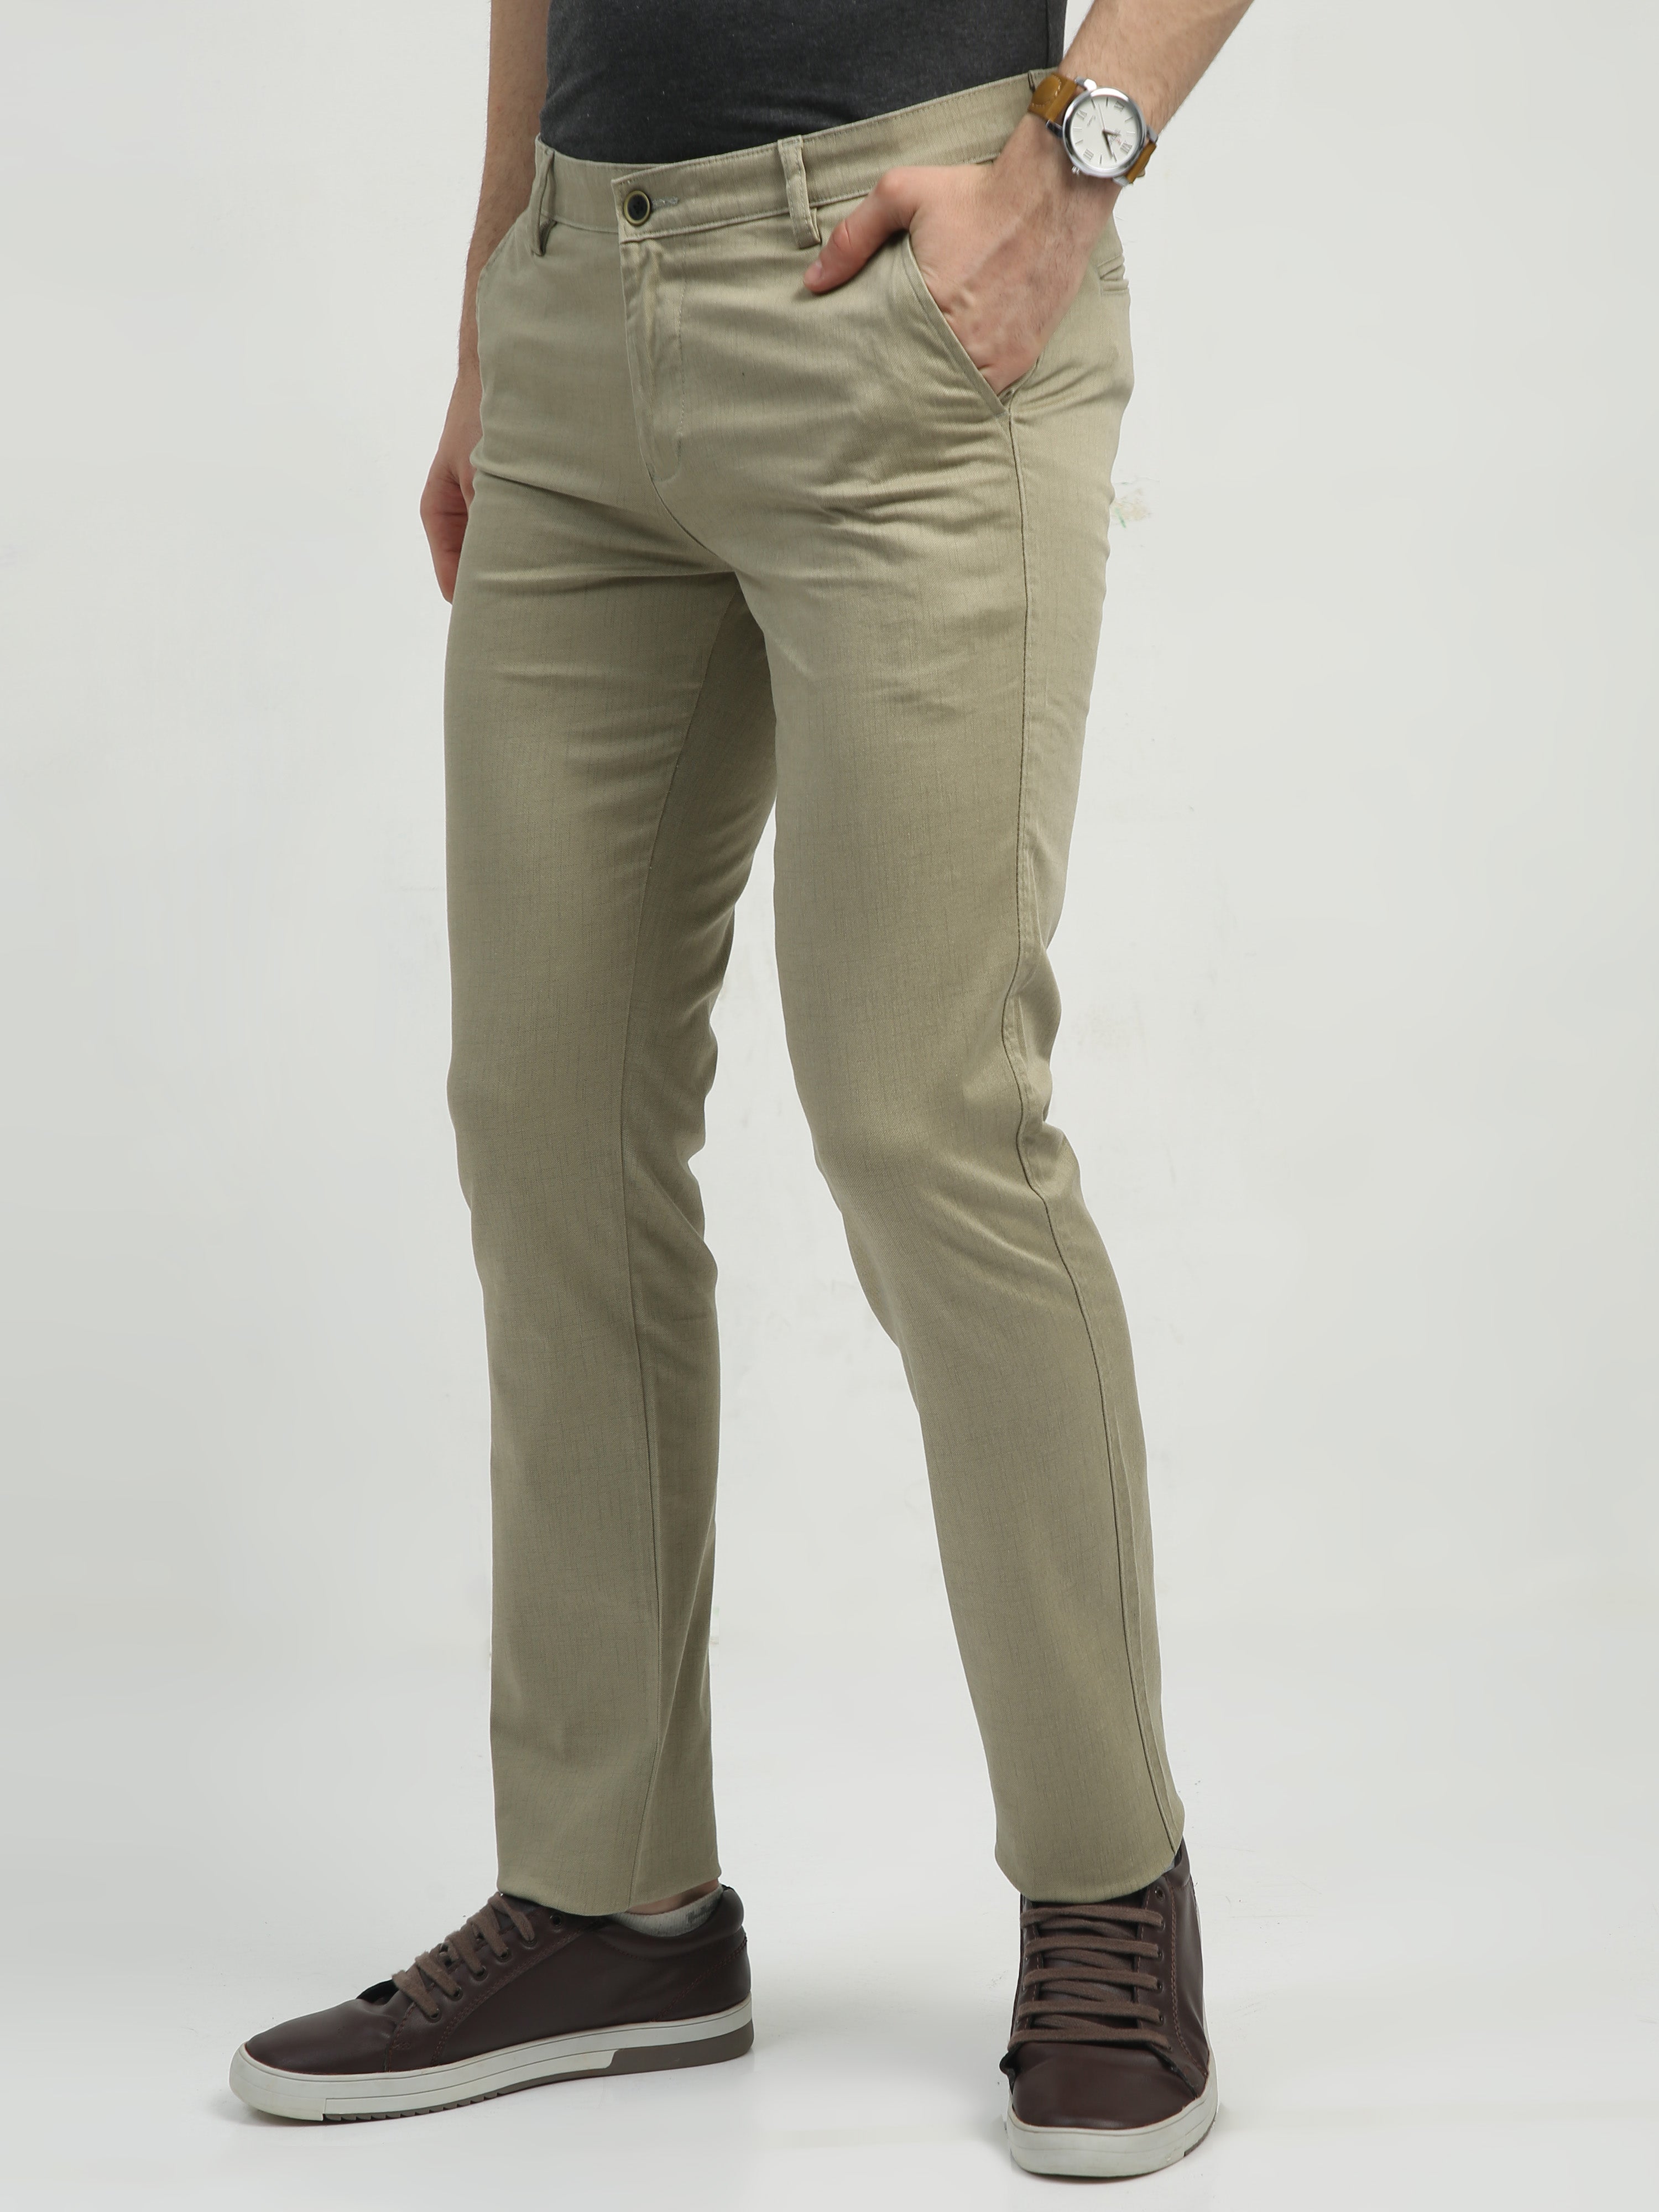 Mens Trouser Shopping | Buy Mens Trousers Online in India | G3+ fashion